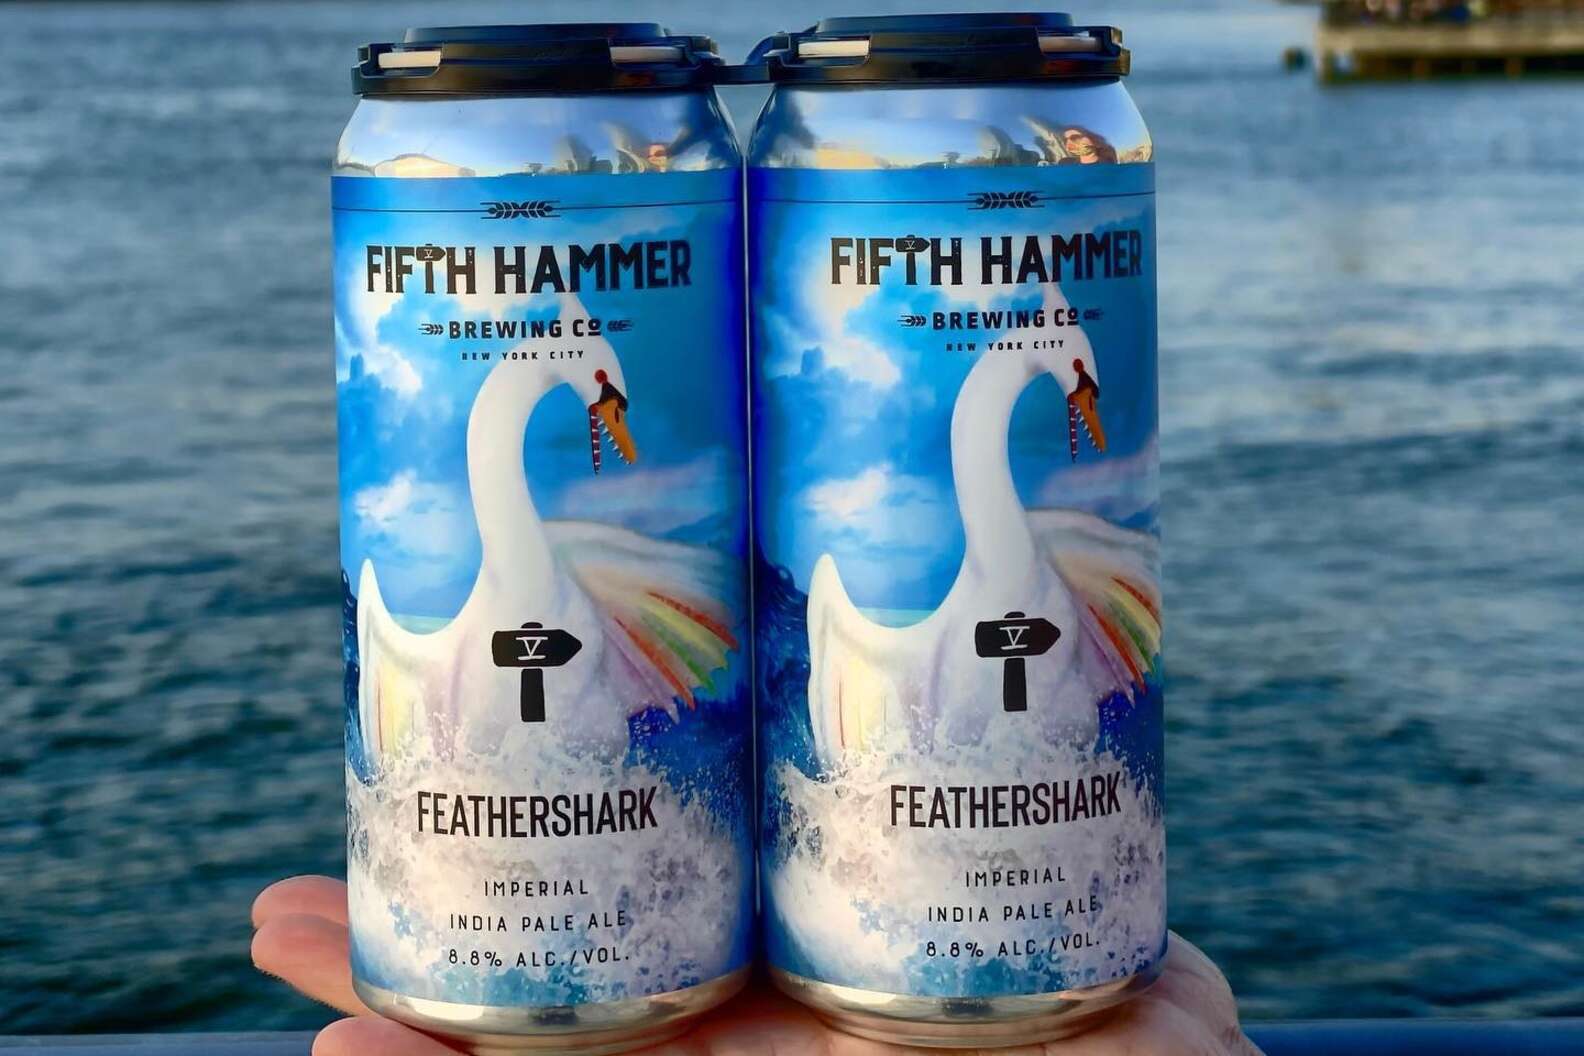 Fifth Hammer Brewing Company